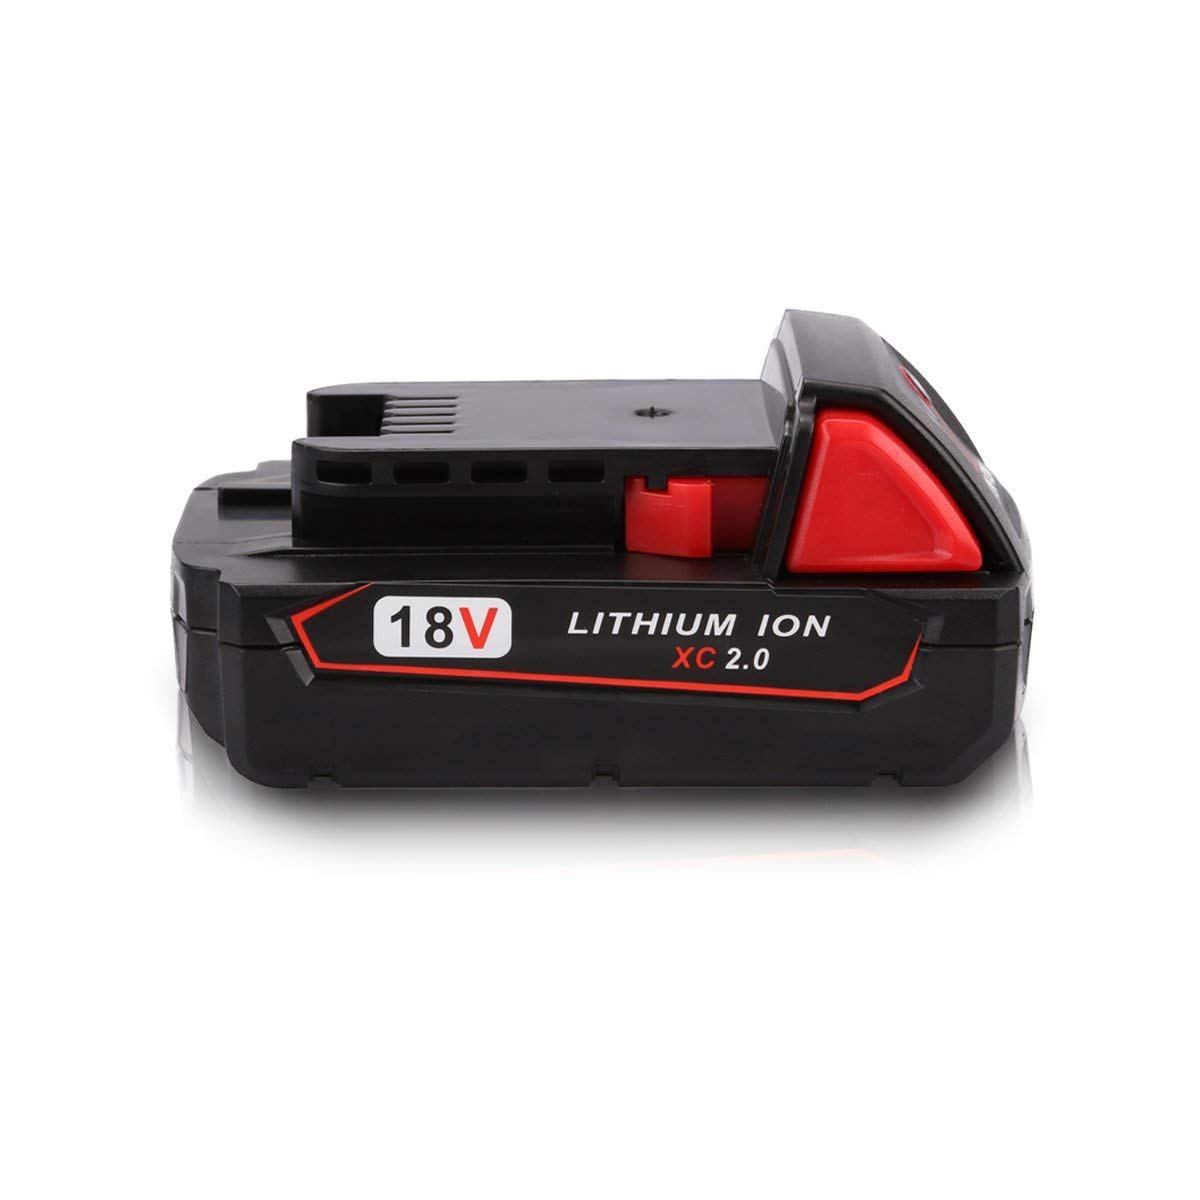 Hilong Lithium MIL M18A 18V  battery pack for Power tool